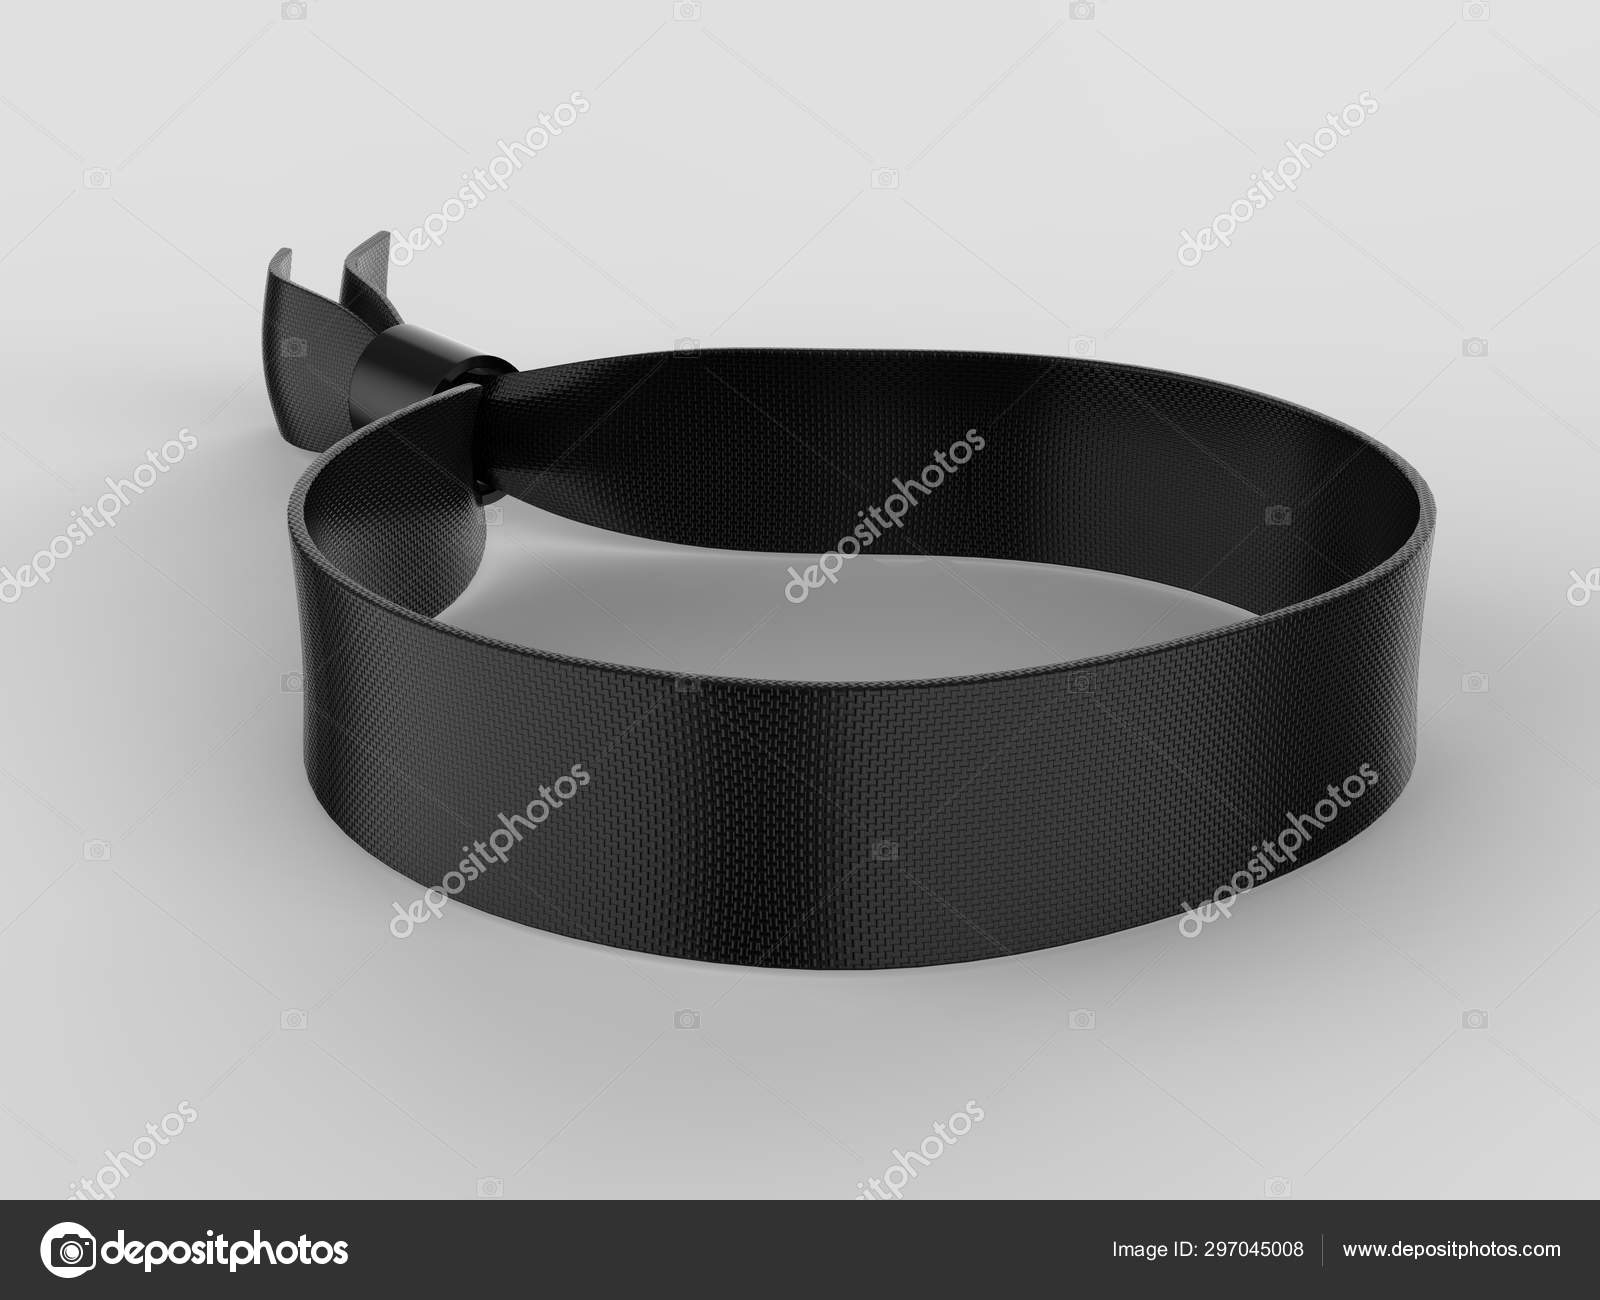 Download Blank Fabric Wristband Mock Design Render Illustration Royalty Free Photo Stock Image By C Godesign99 297045008